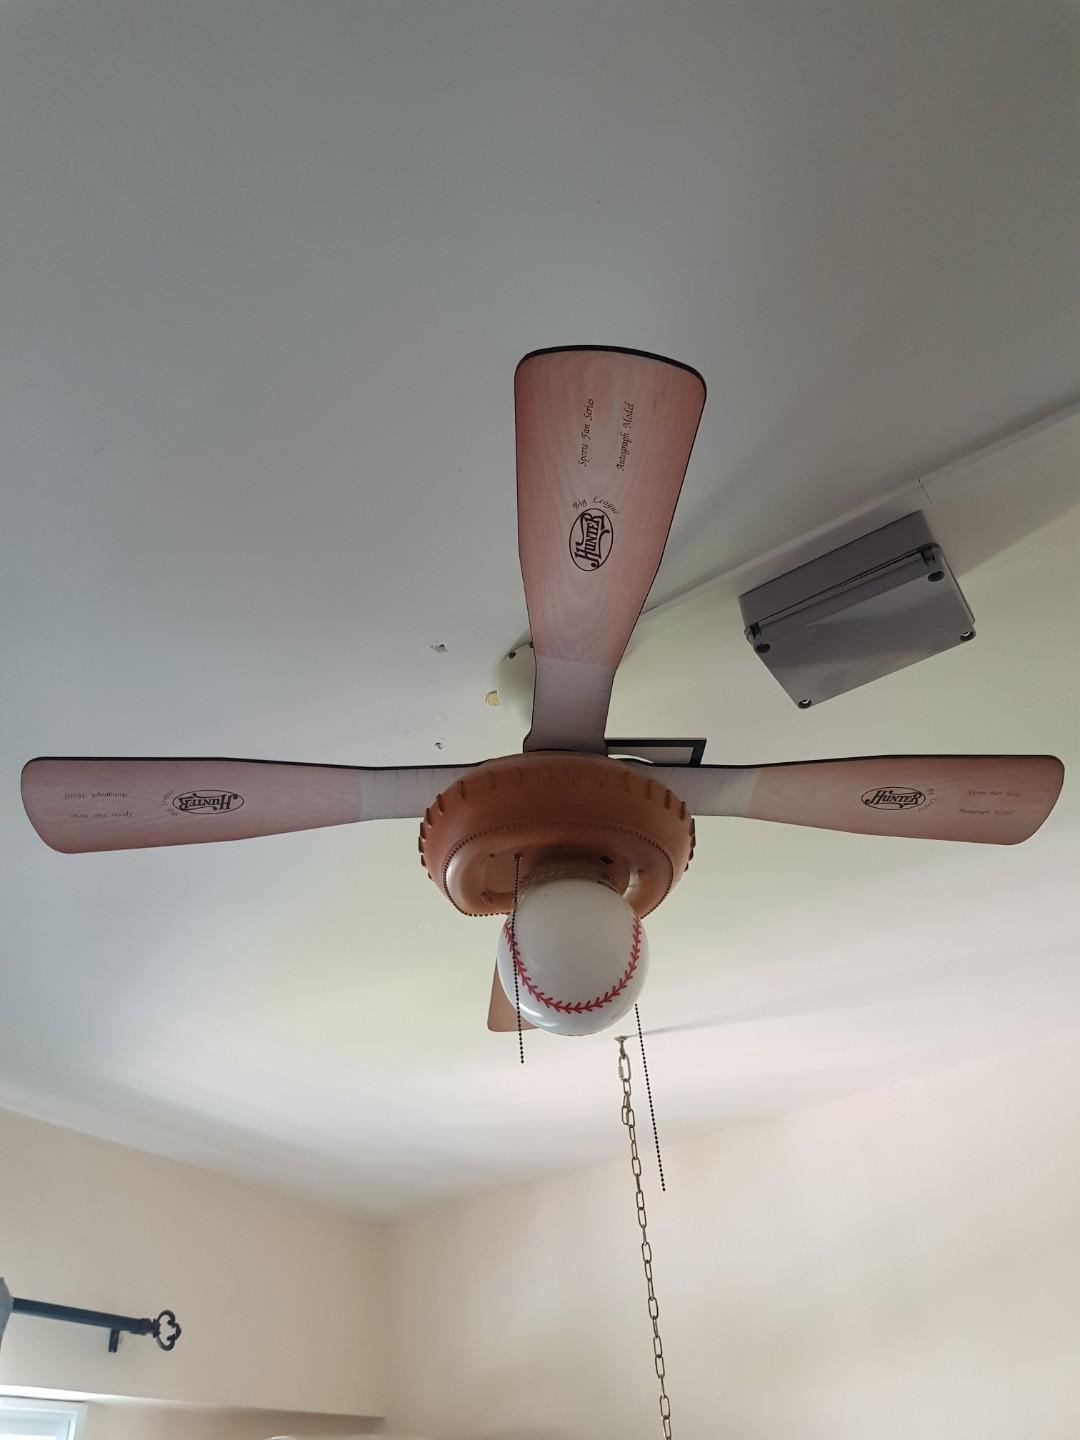 Hunter Baseball Ceiling Fan Home Appliances Cooling Air Care